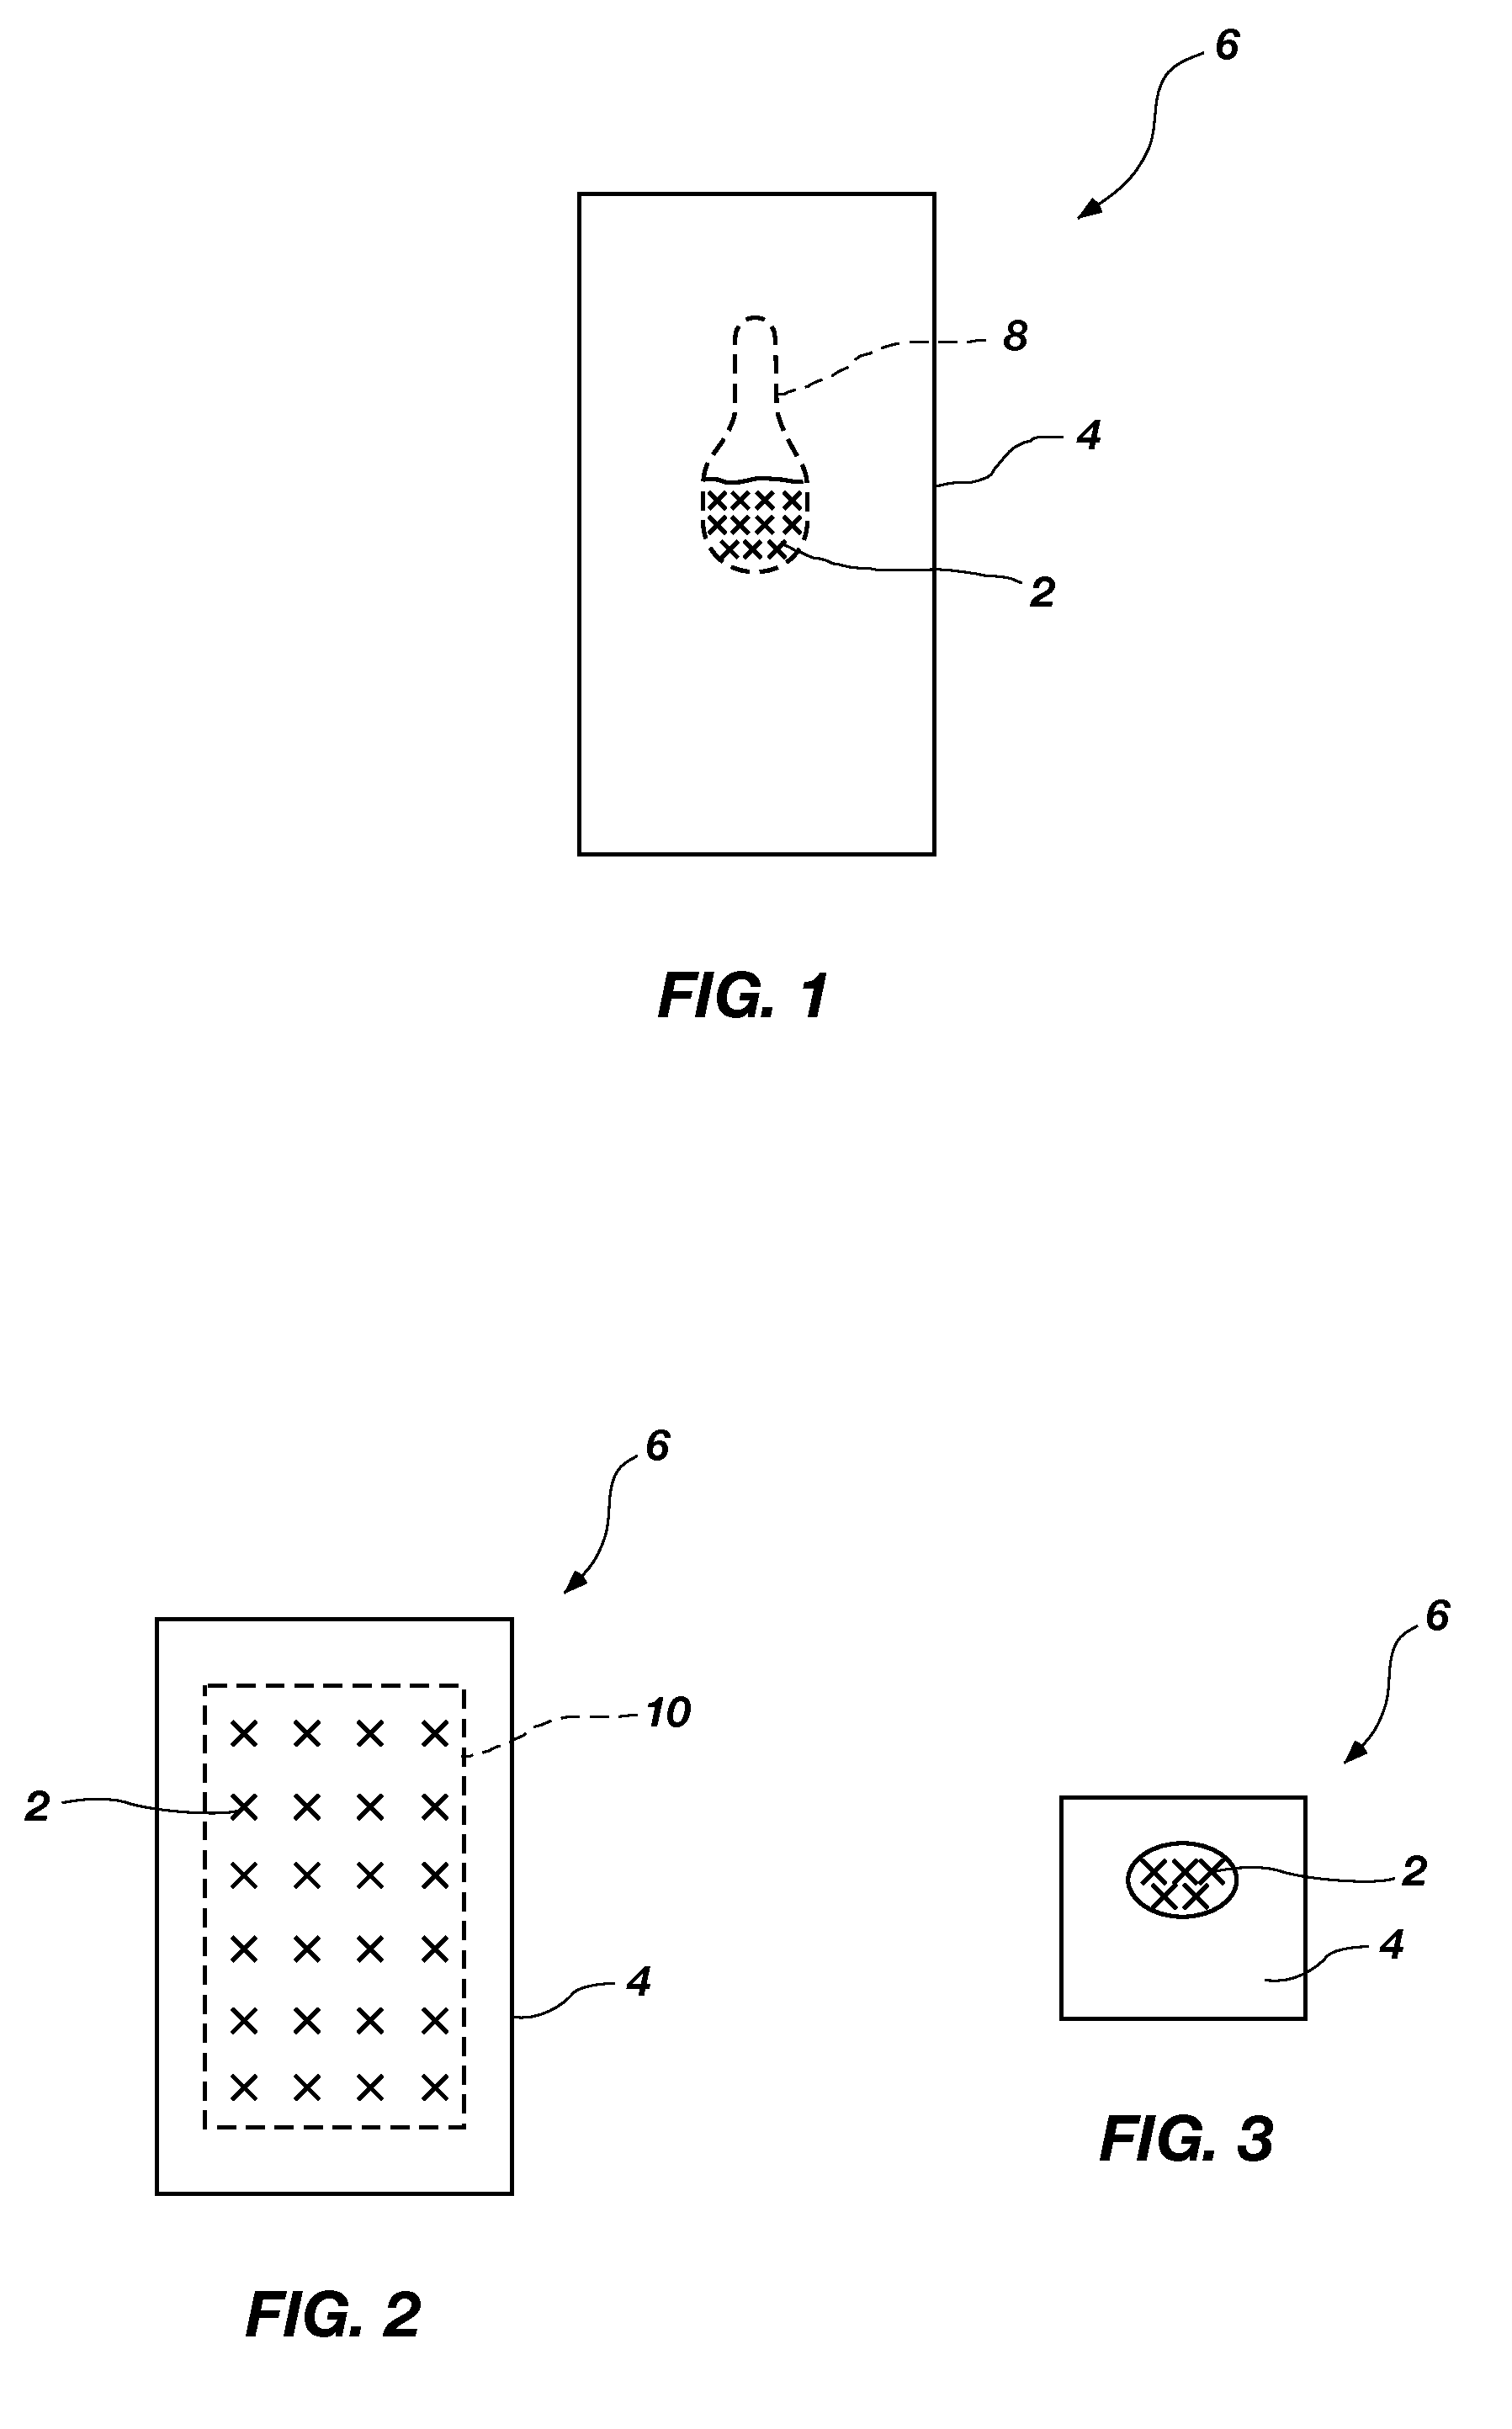 Taggants, method for forming a taggant, and a method for detecting an object